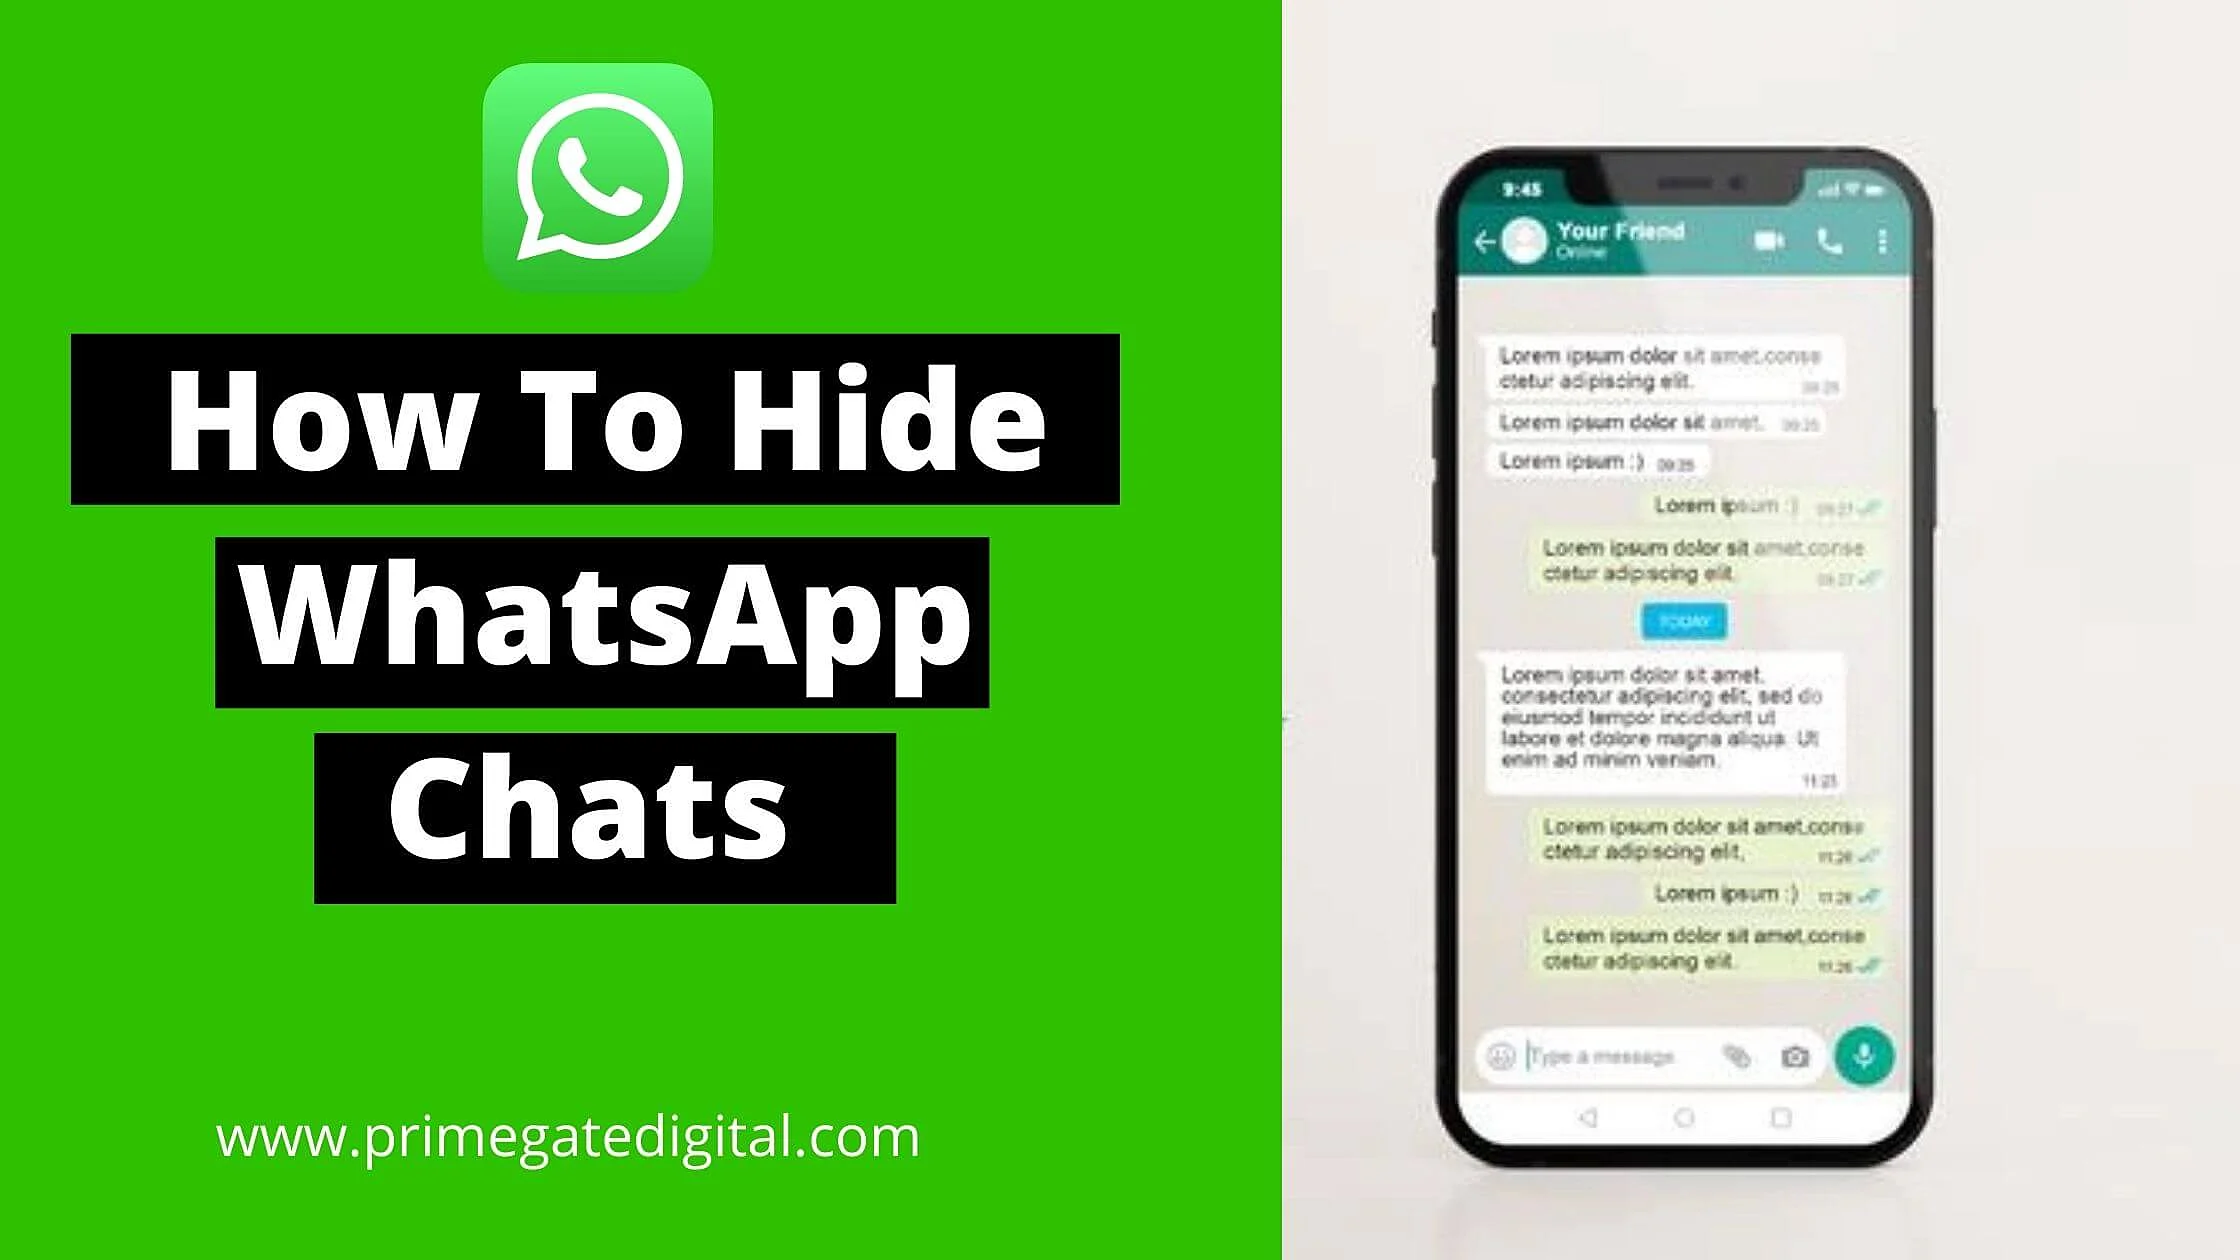 How To Hide WhatsApp Chats